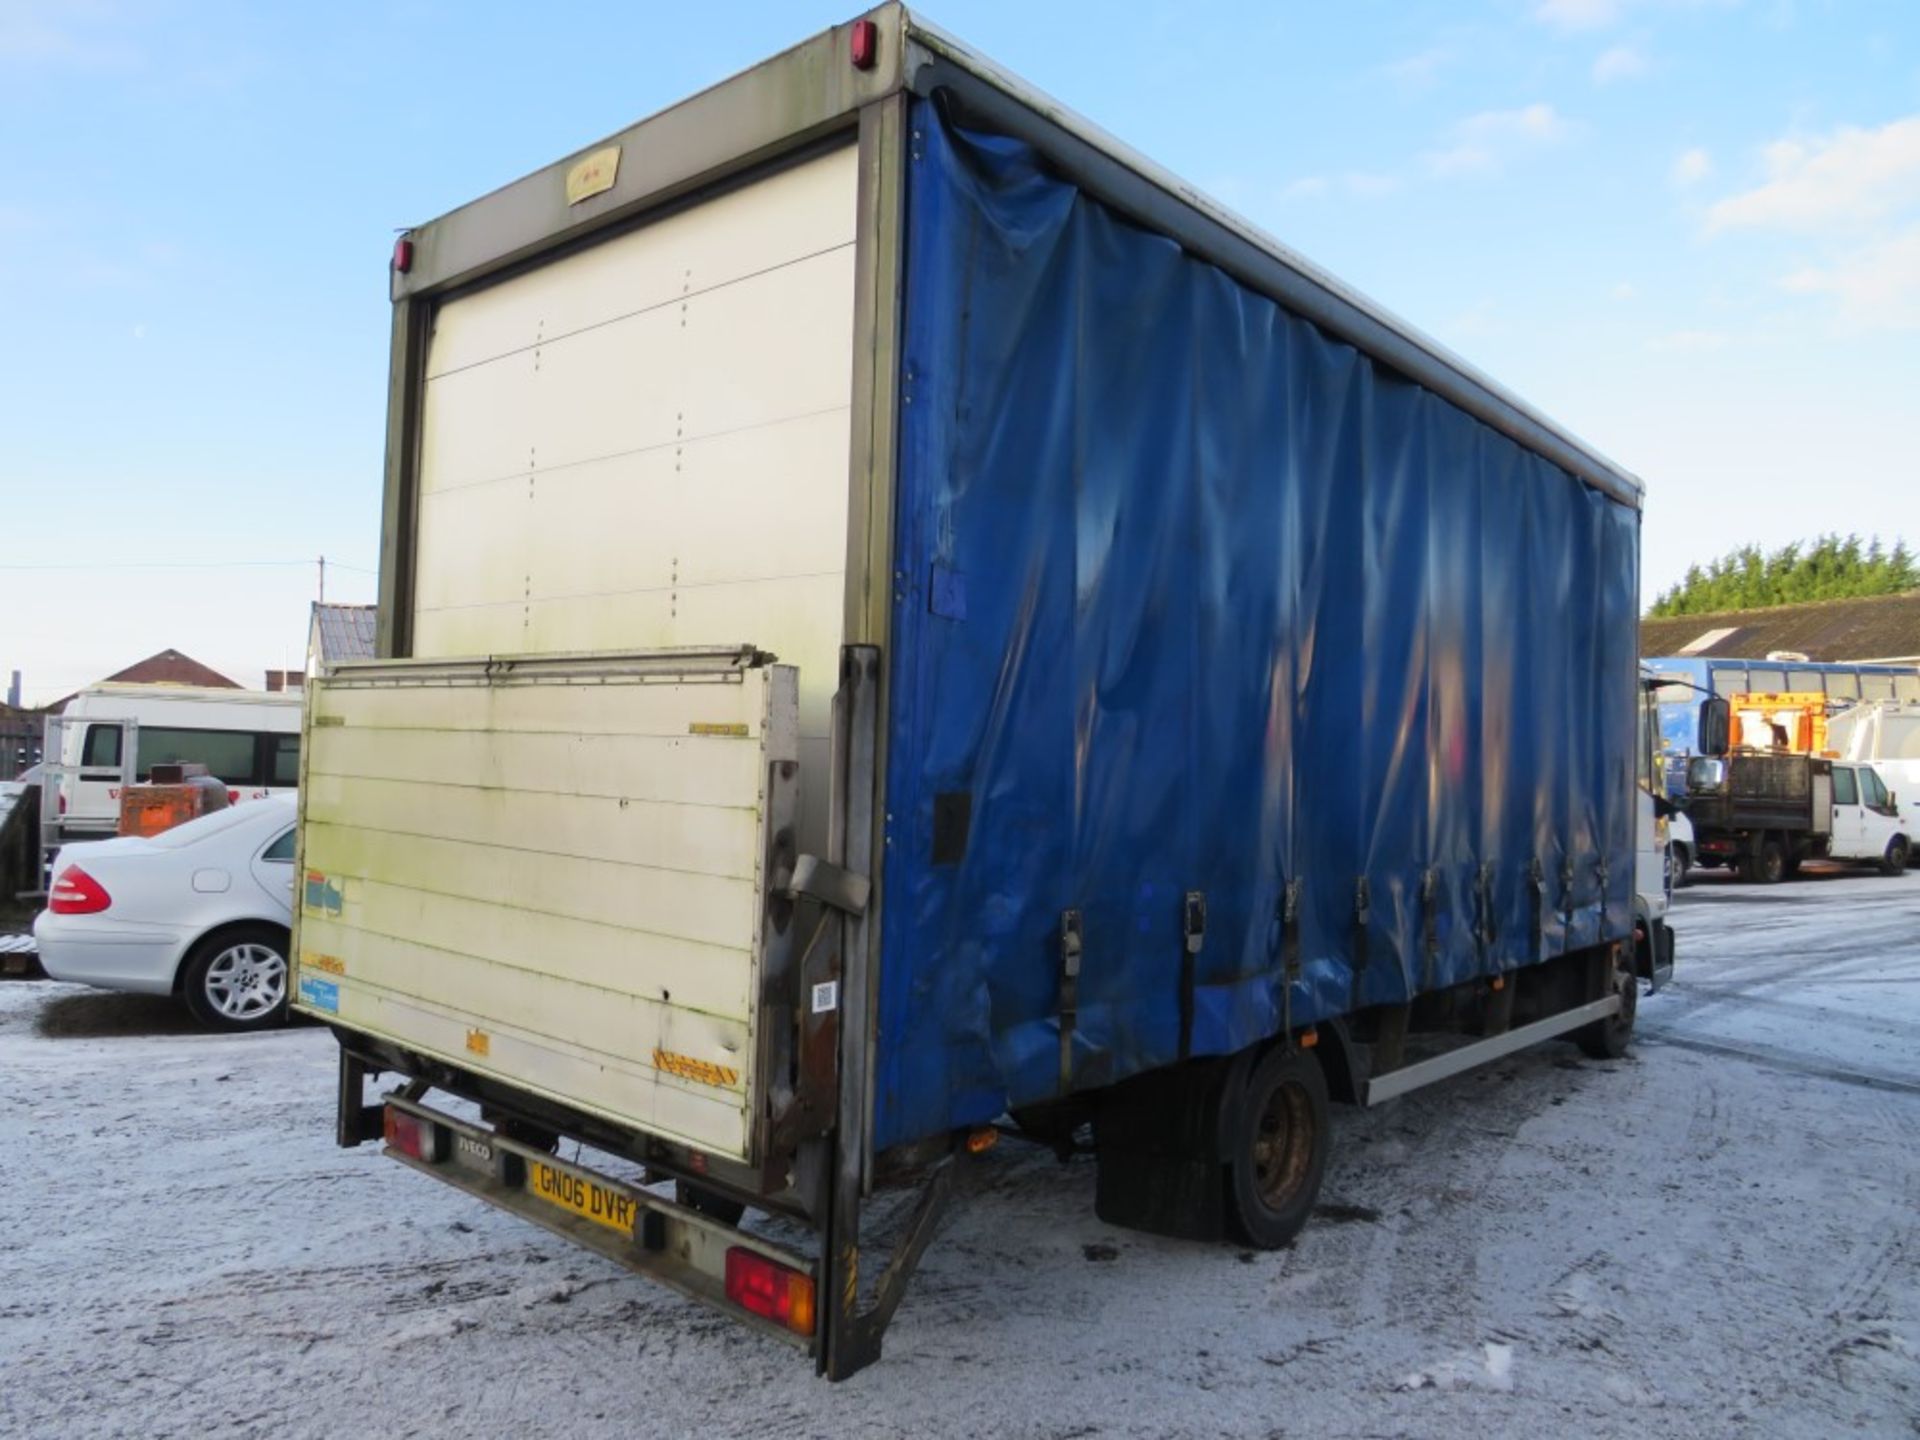 06 reg IVECO CURTAIN SIDE C/W TAIL LIFT, 1ST REG 04/06, 559437KM, V5 HERE, 3 FORMER KEEPERS [NO - Image 4 of 6